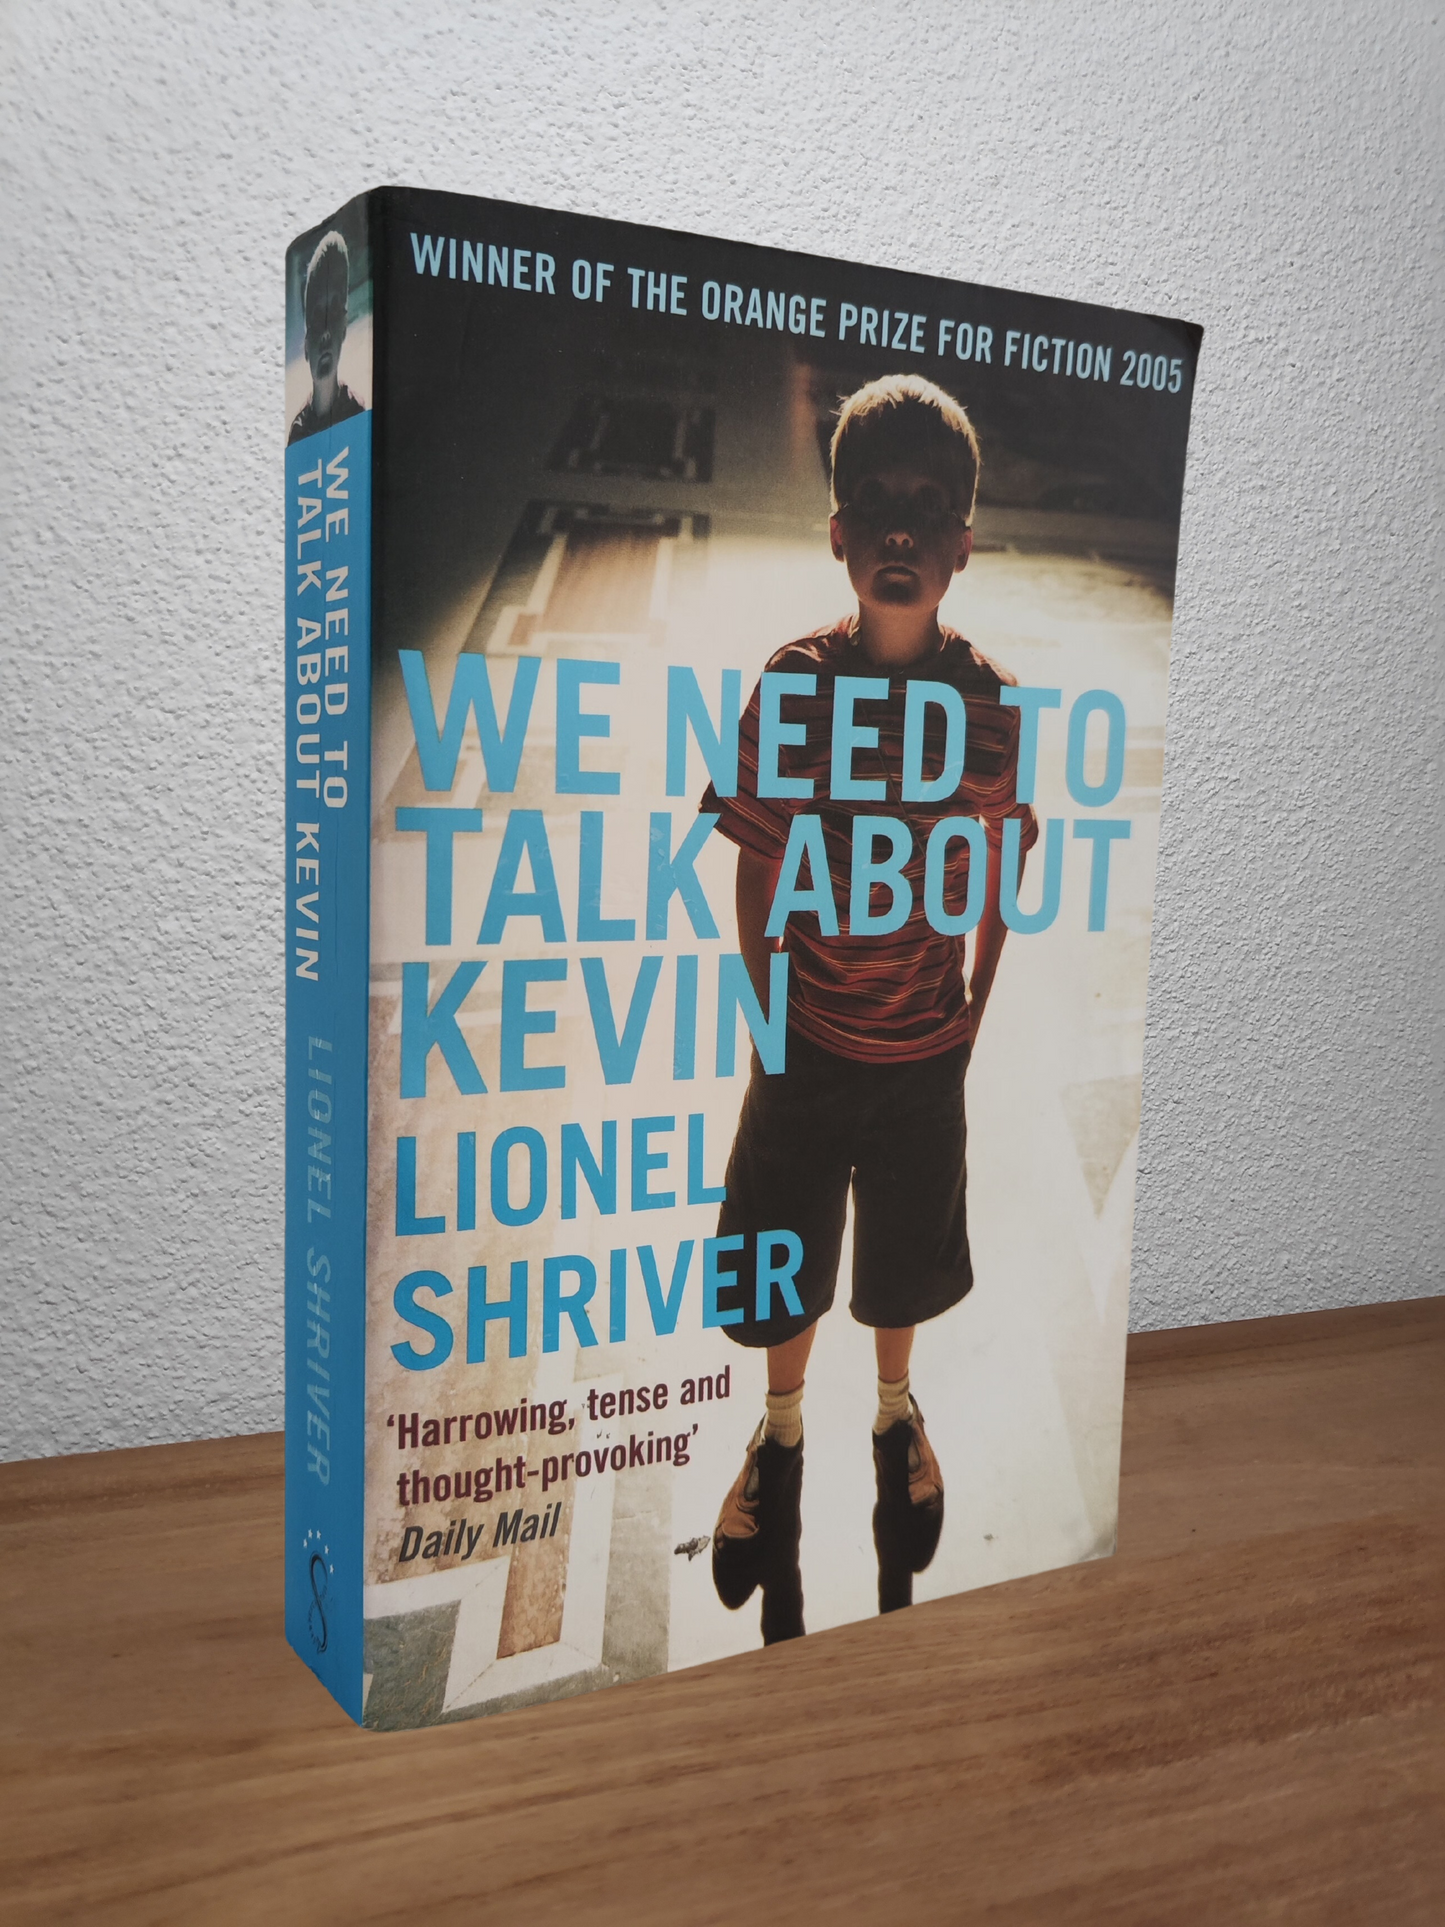 Lionel Shriver - We Need to Talk About Kevin